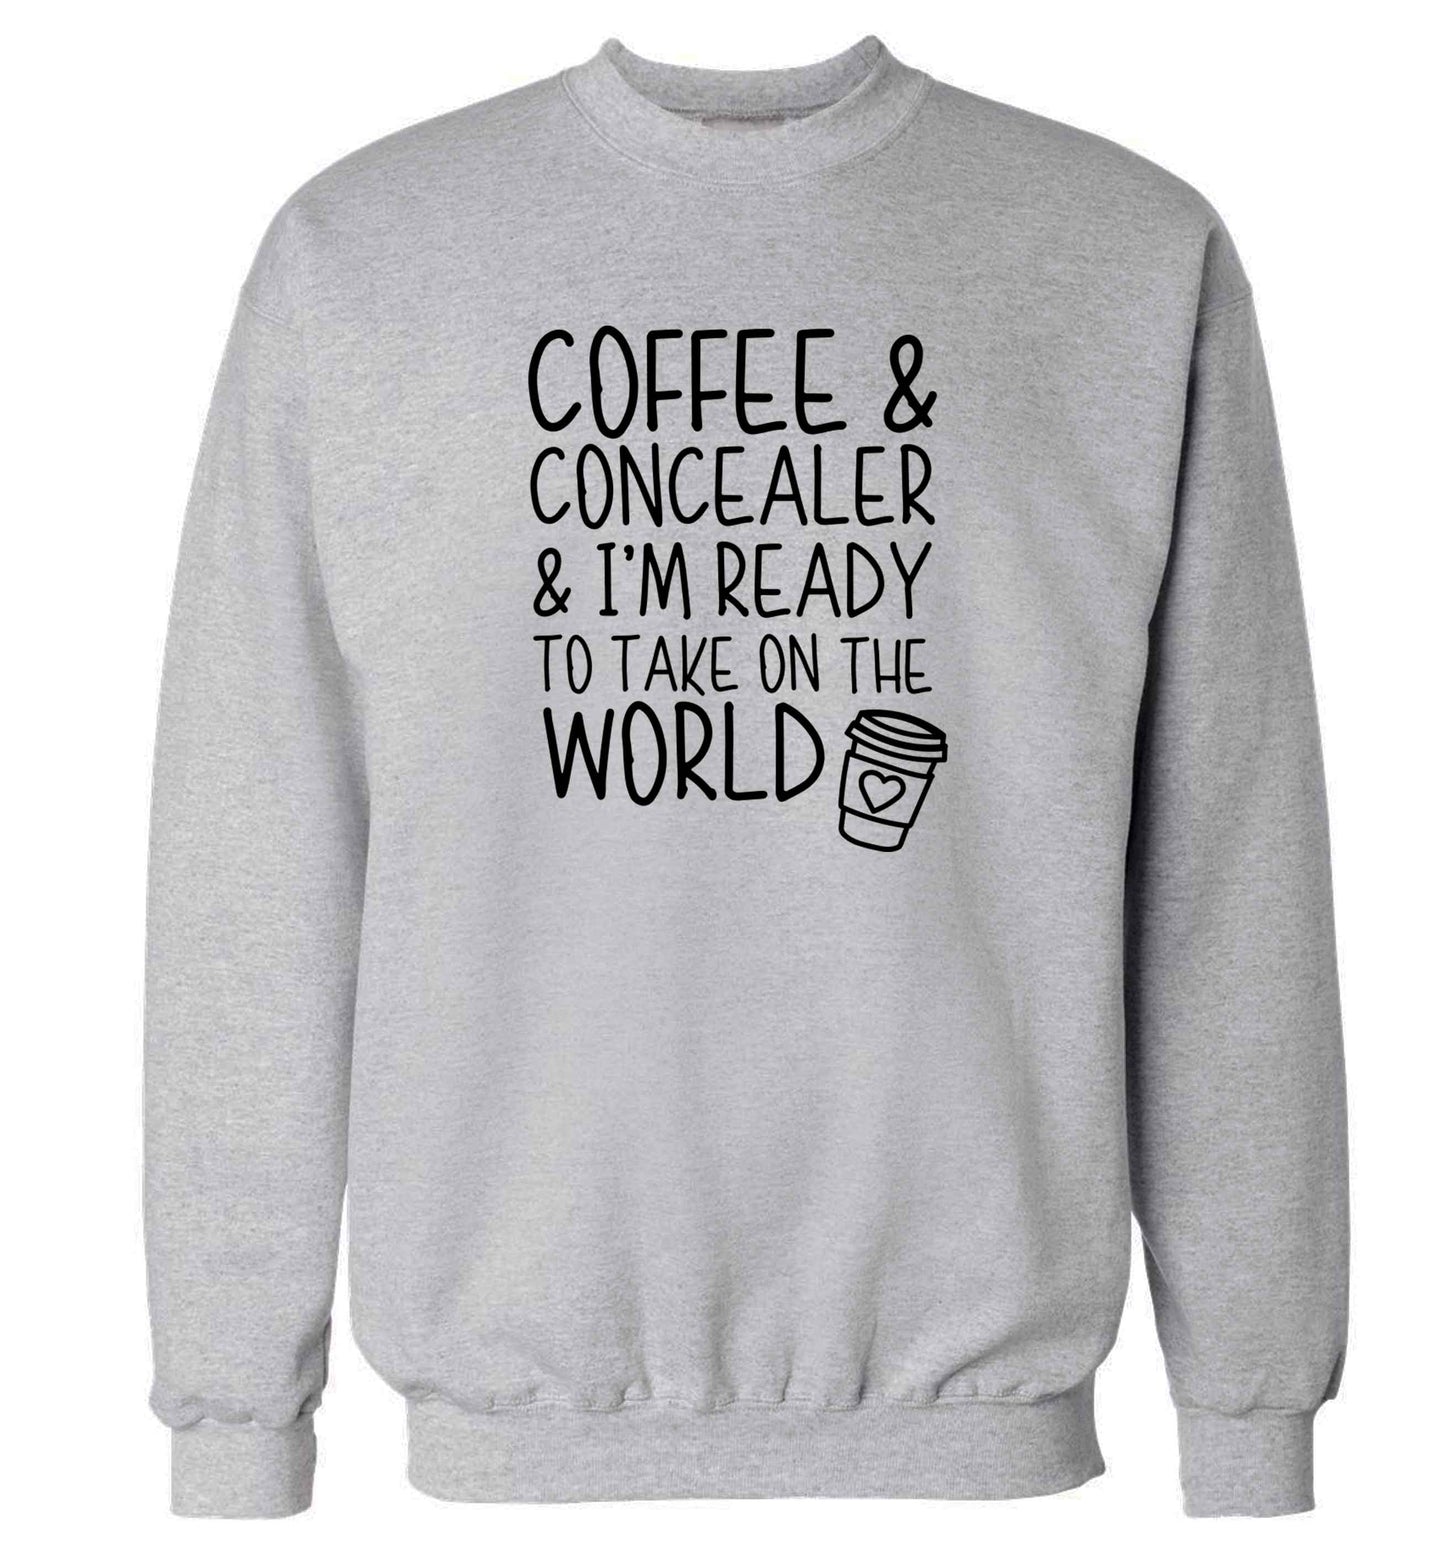 Coffee and concealer and I'm ready to take on the world adult's unisex grey sweater 2XL